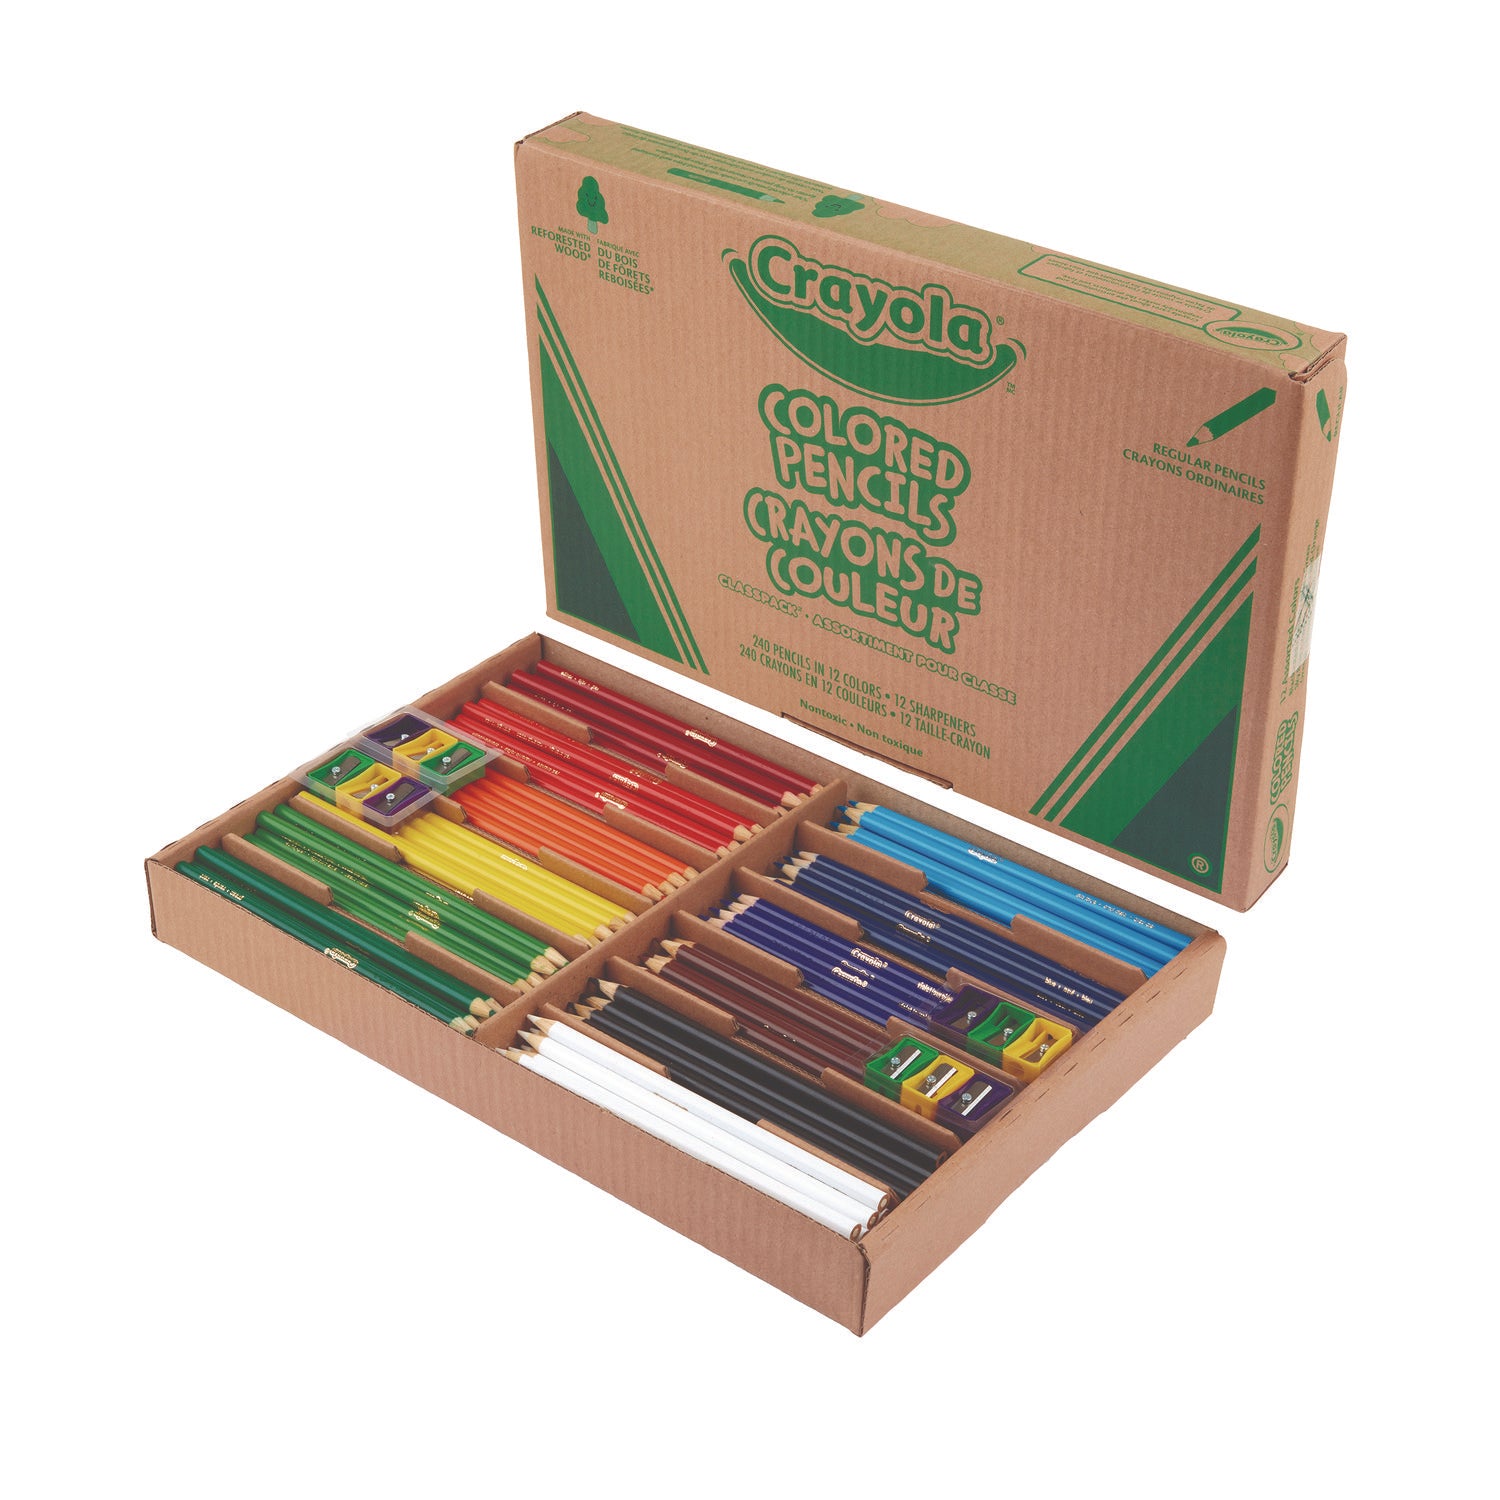 color-pencil-classpack-set-with-240-pencils-and-12-pencil-sharpeners-assorted-lead-and-barrel-colors-240-pack_cyo687506 - 2